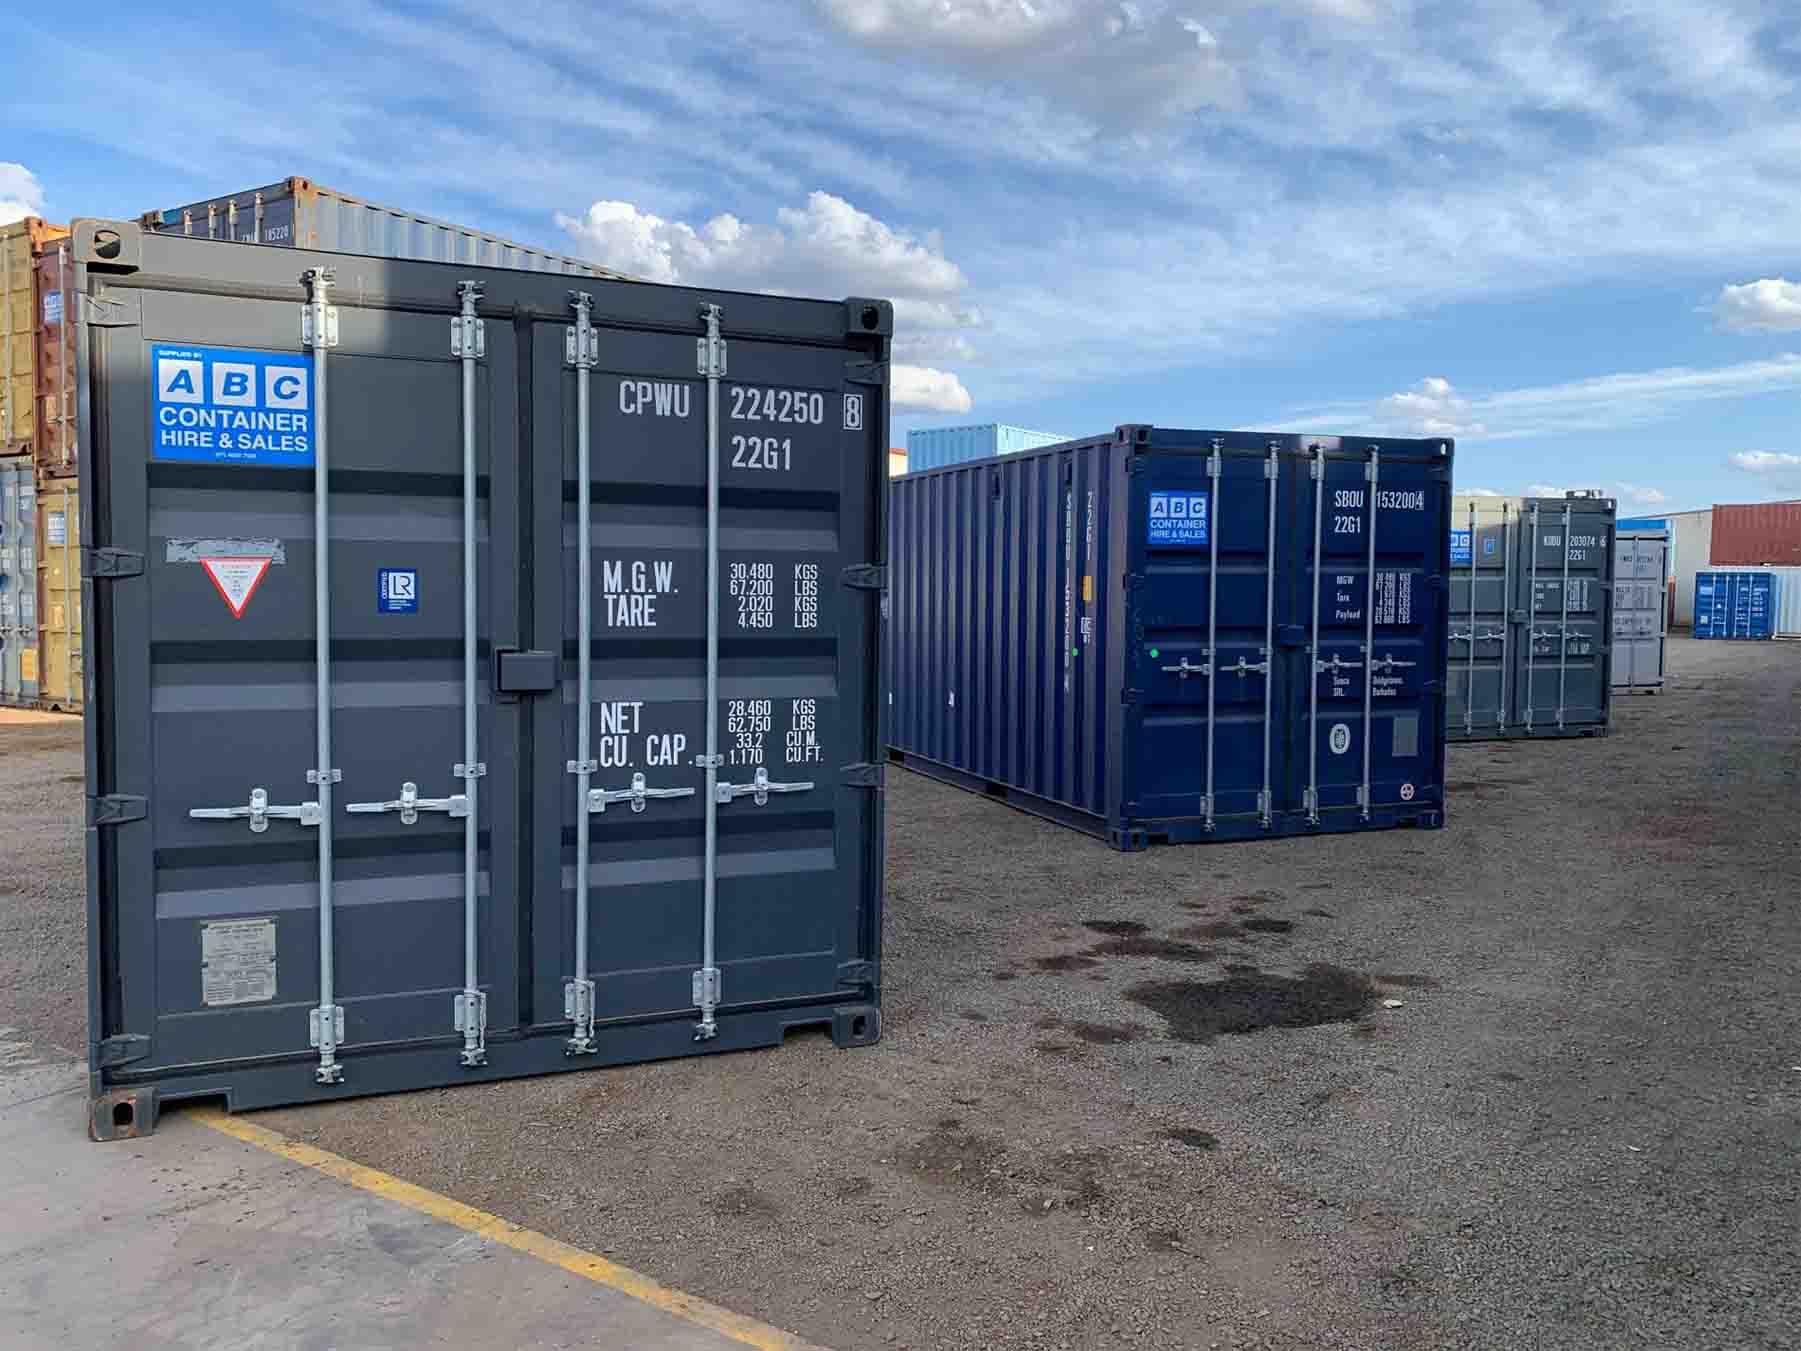 Shipping containers in a row